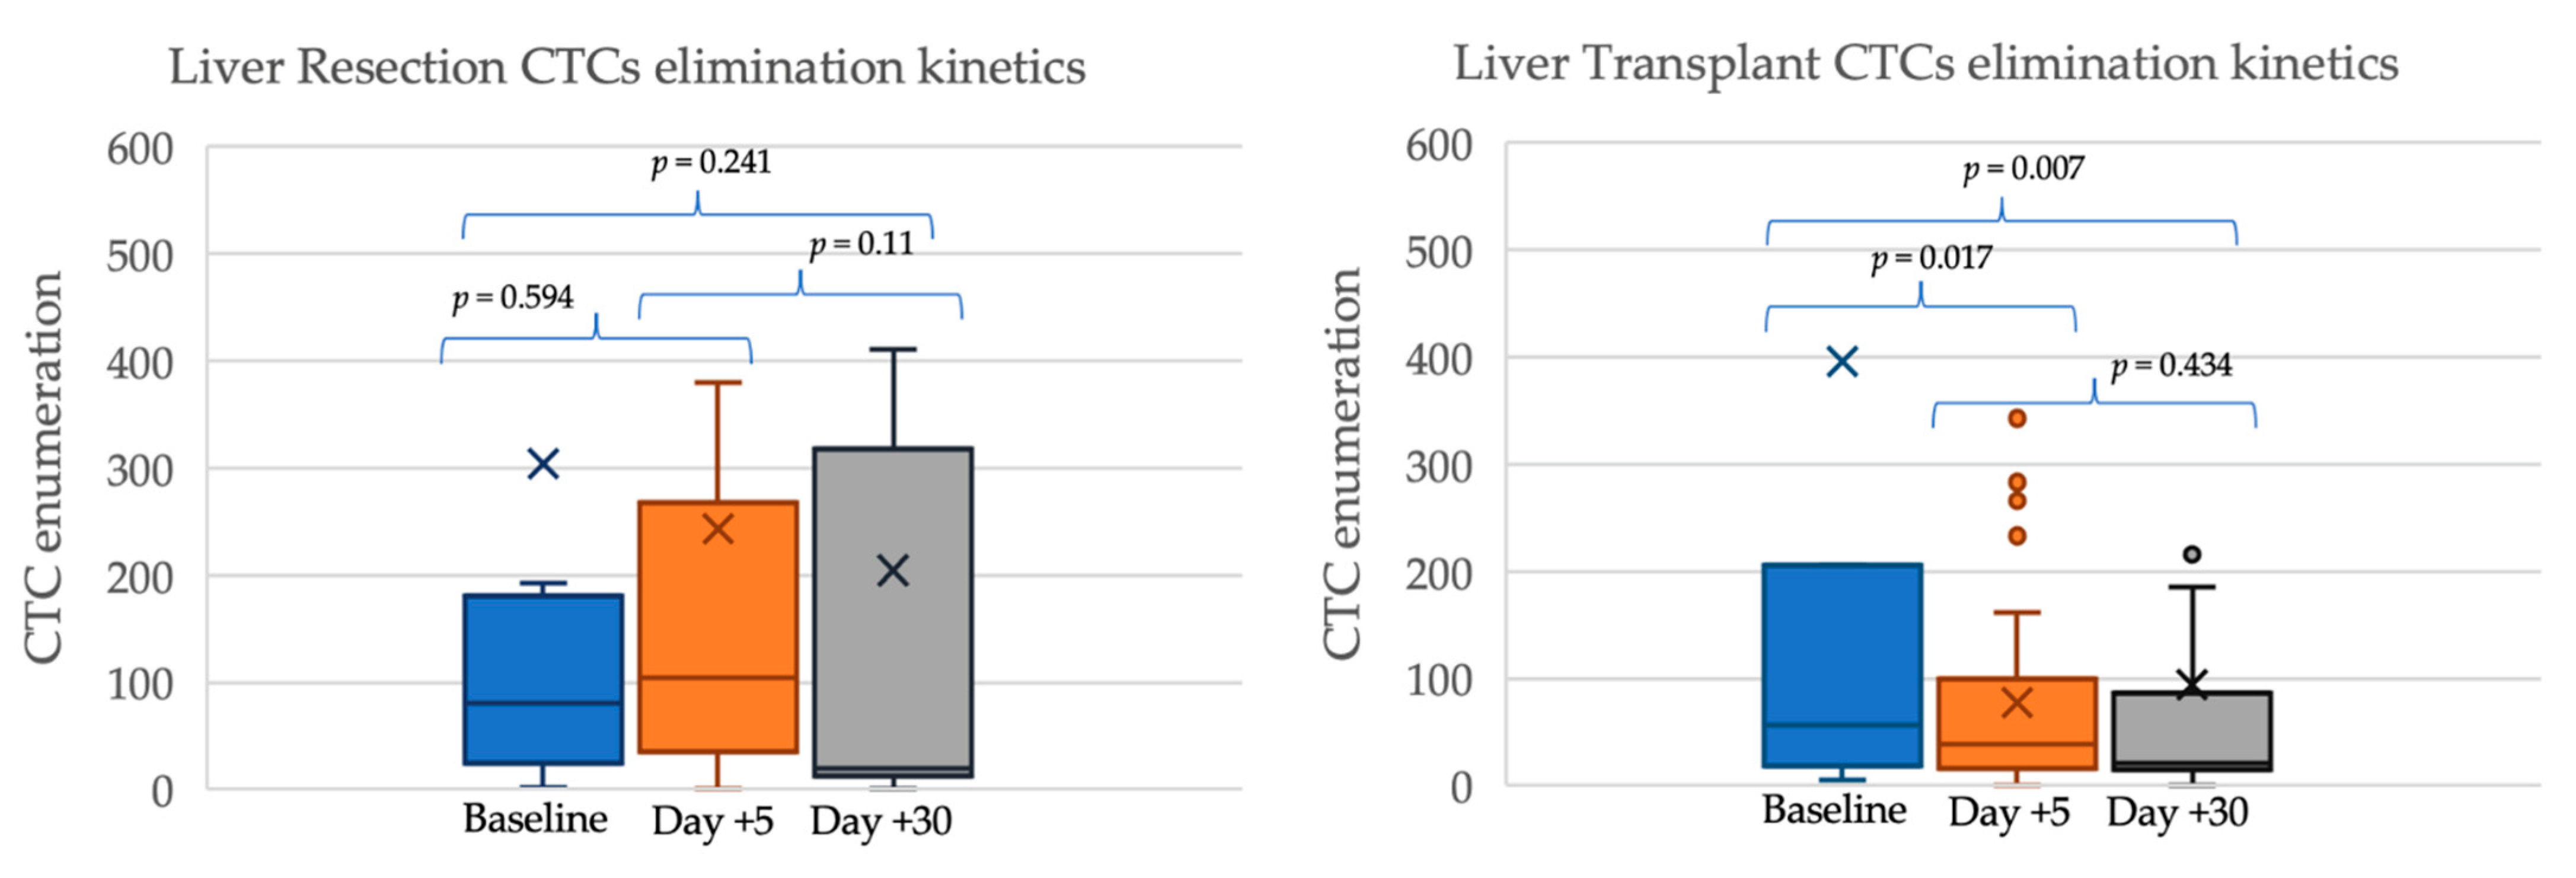 Cancers | Free Full-Text | Clearance of Circulating Tumor Cells in Patients  with Hepatocellular Carcinoma Undergoing Surgical Resection or Liver  Transplantation